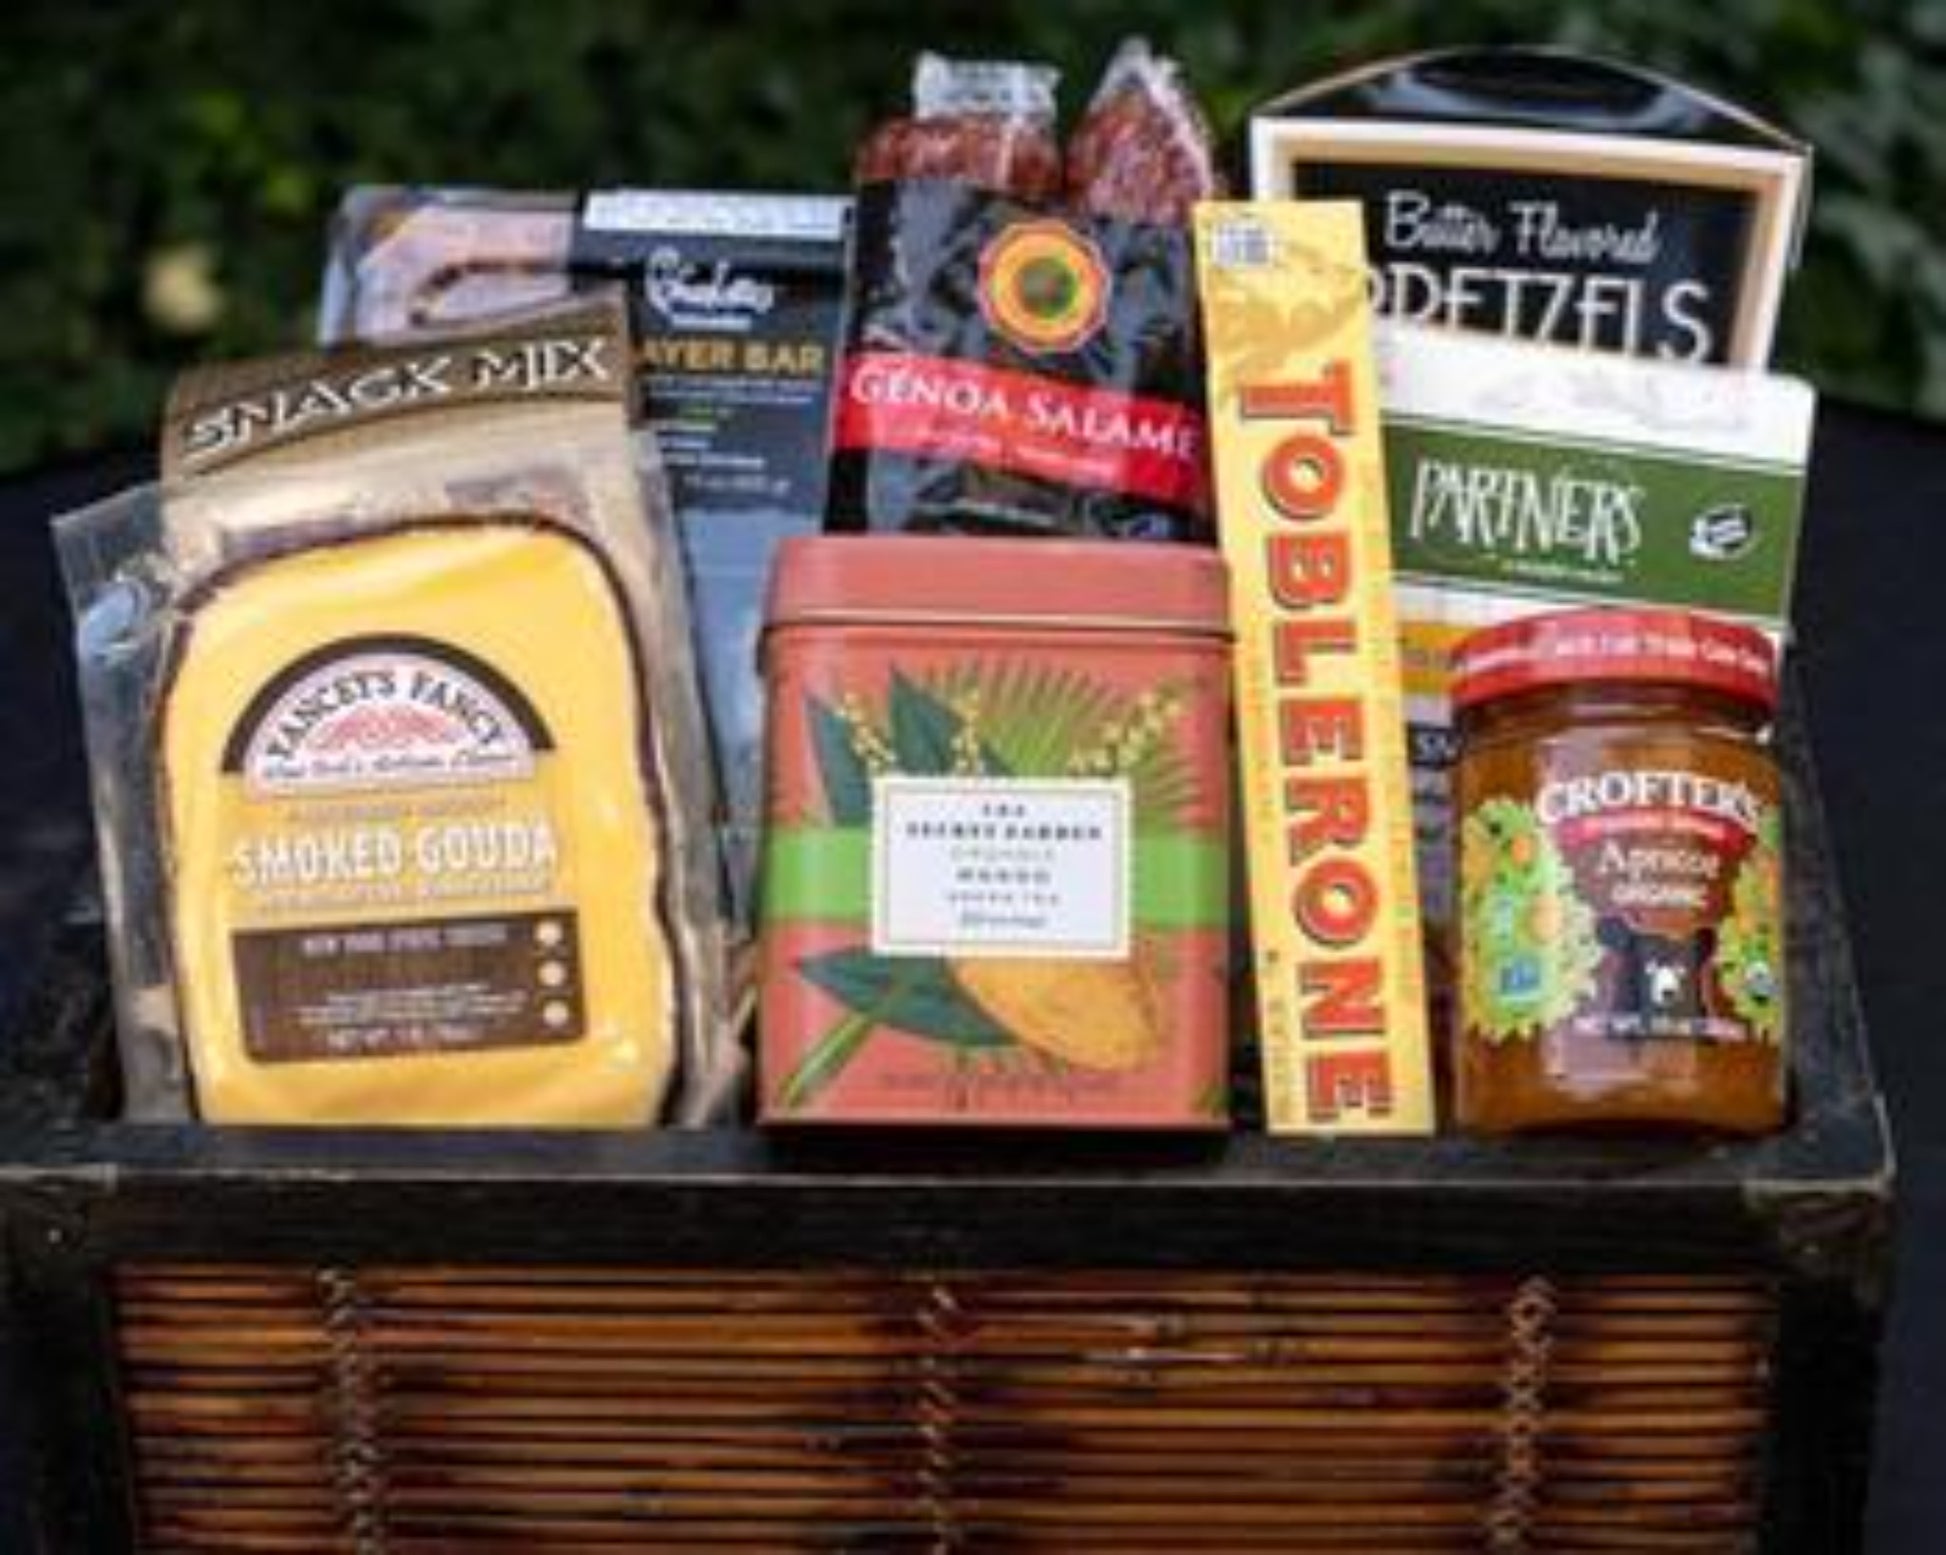 Gourmet Food Gift Basket For Men packed with: Age Cheese, Crackers, Salami, gourmet tea, pretzel and snack mix 